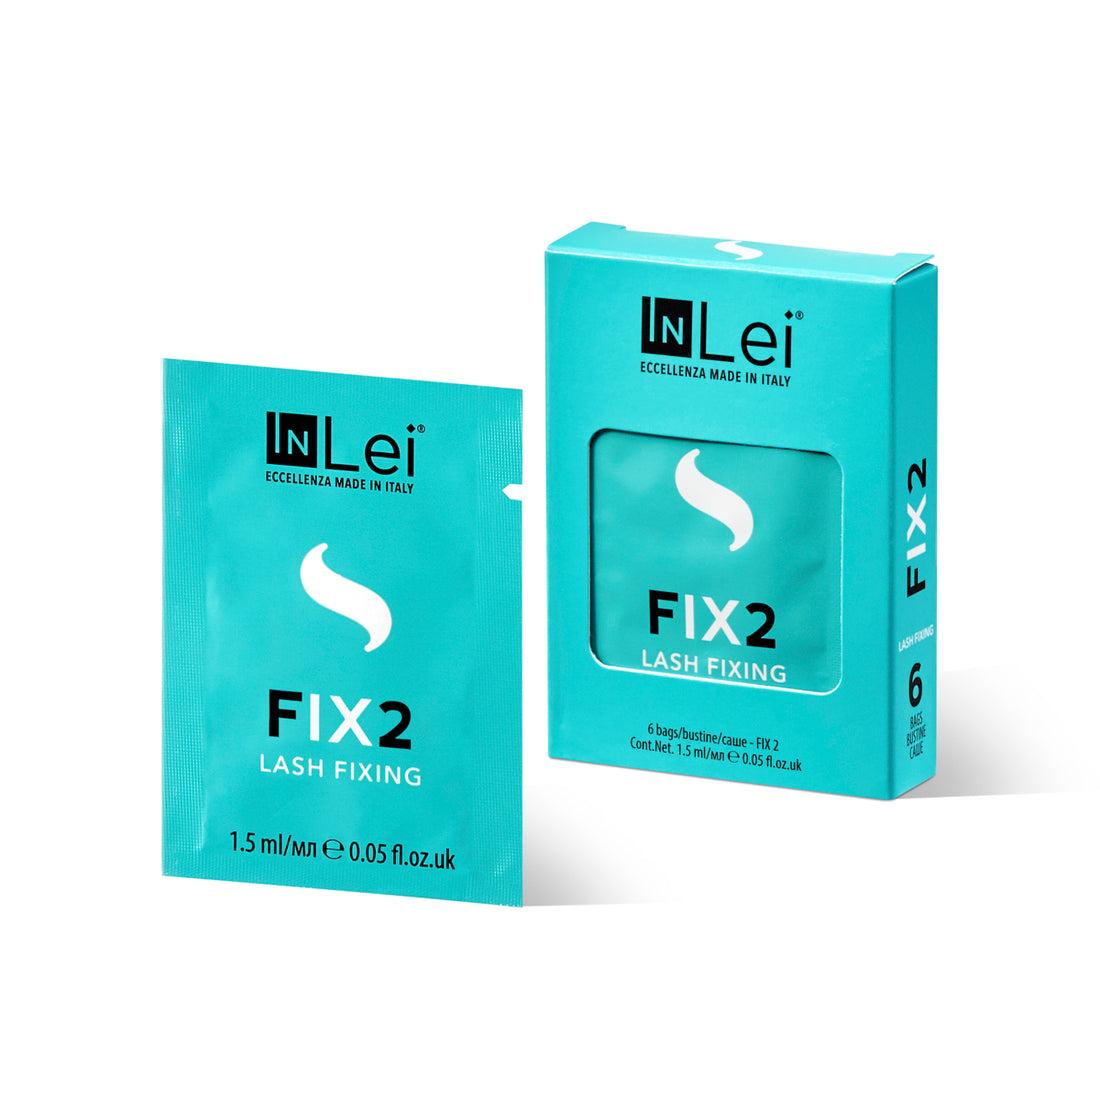 INLEI - Fix 2 (Sachets - 6 in a Pack)